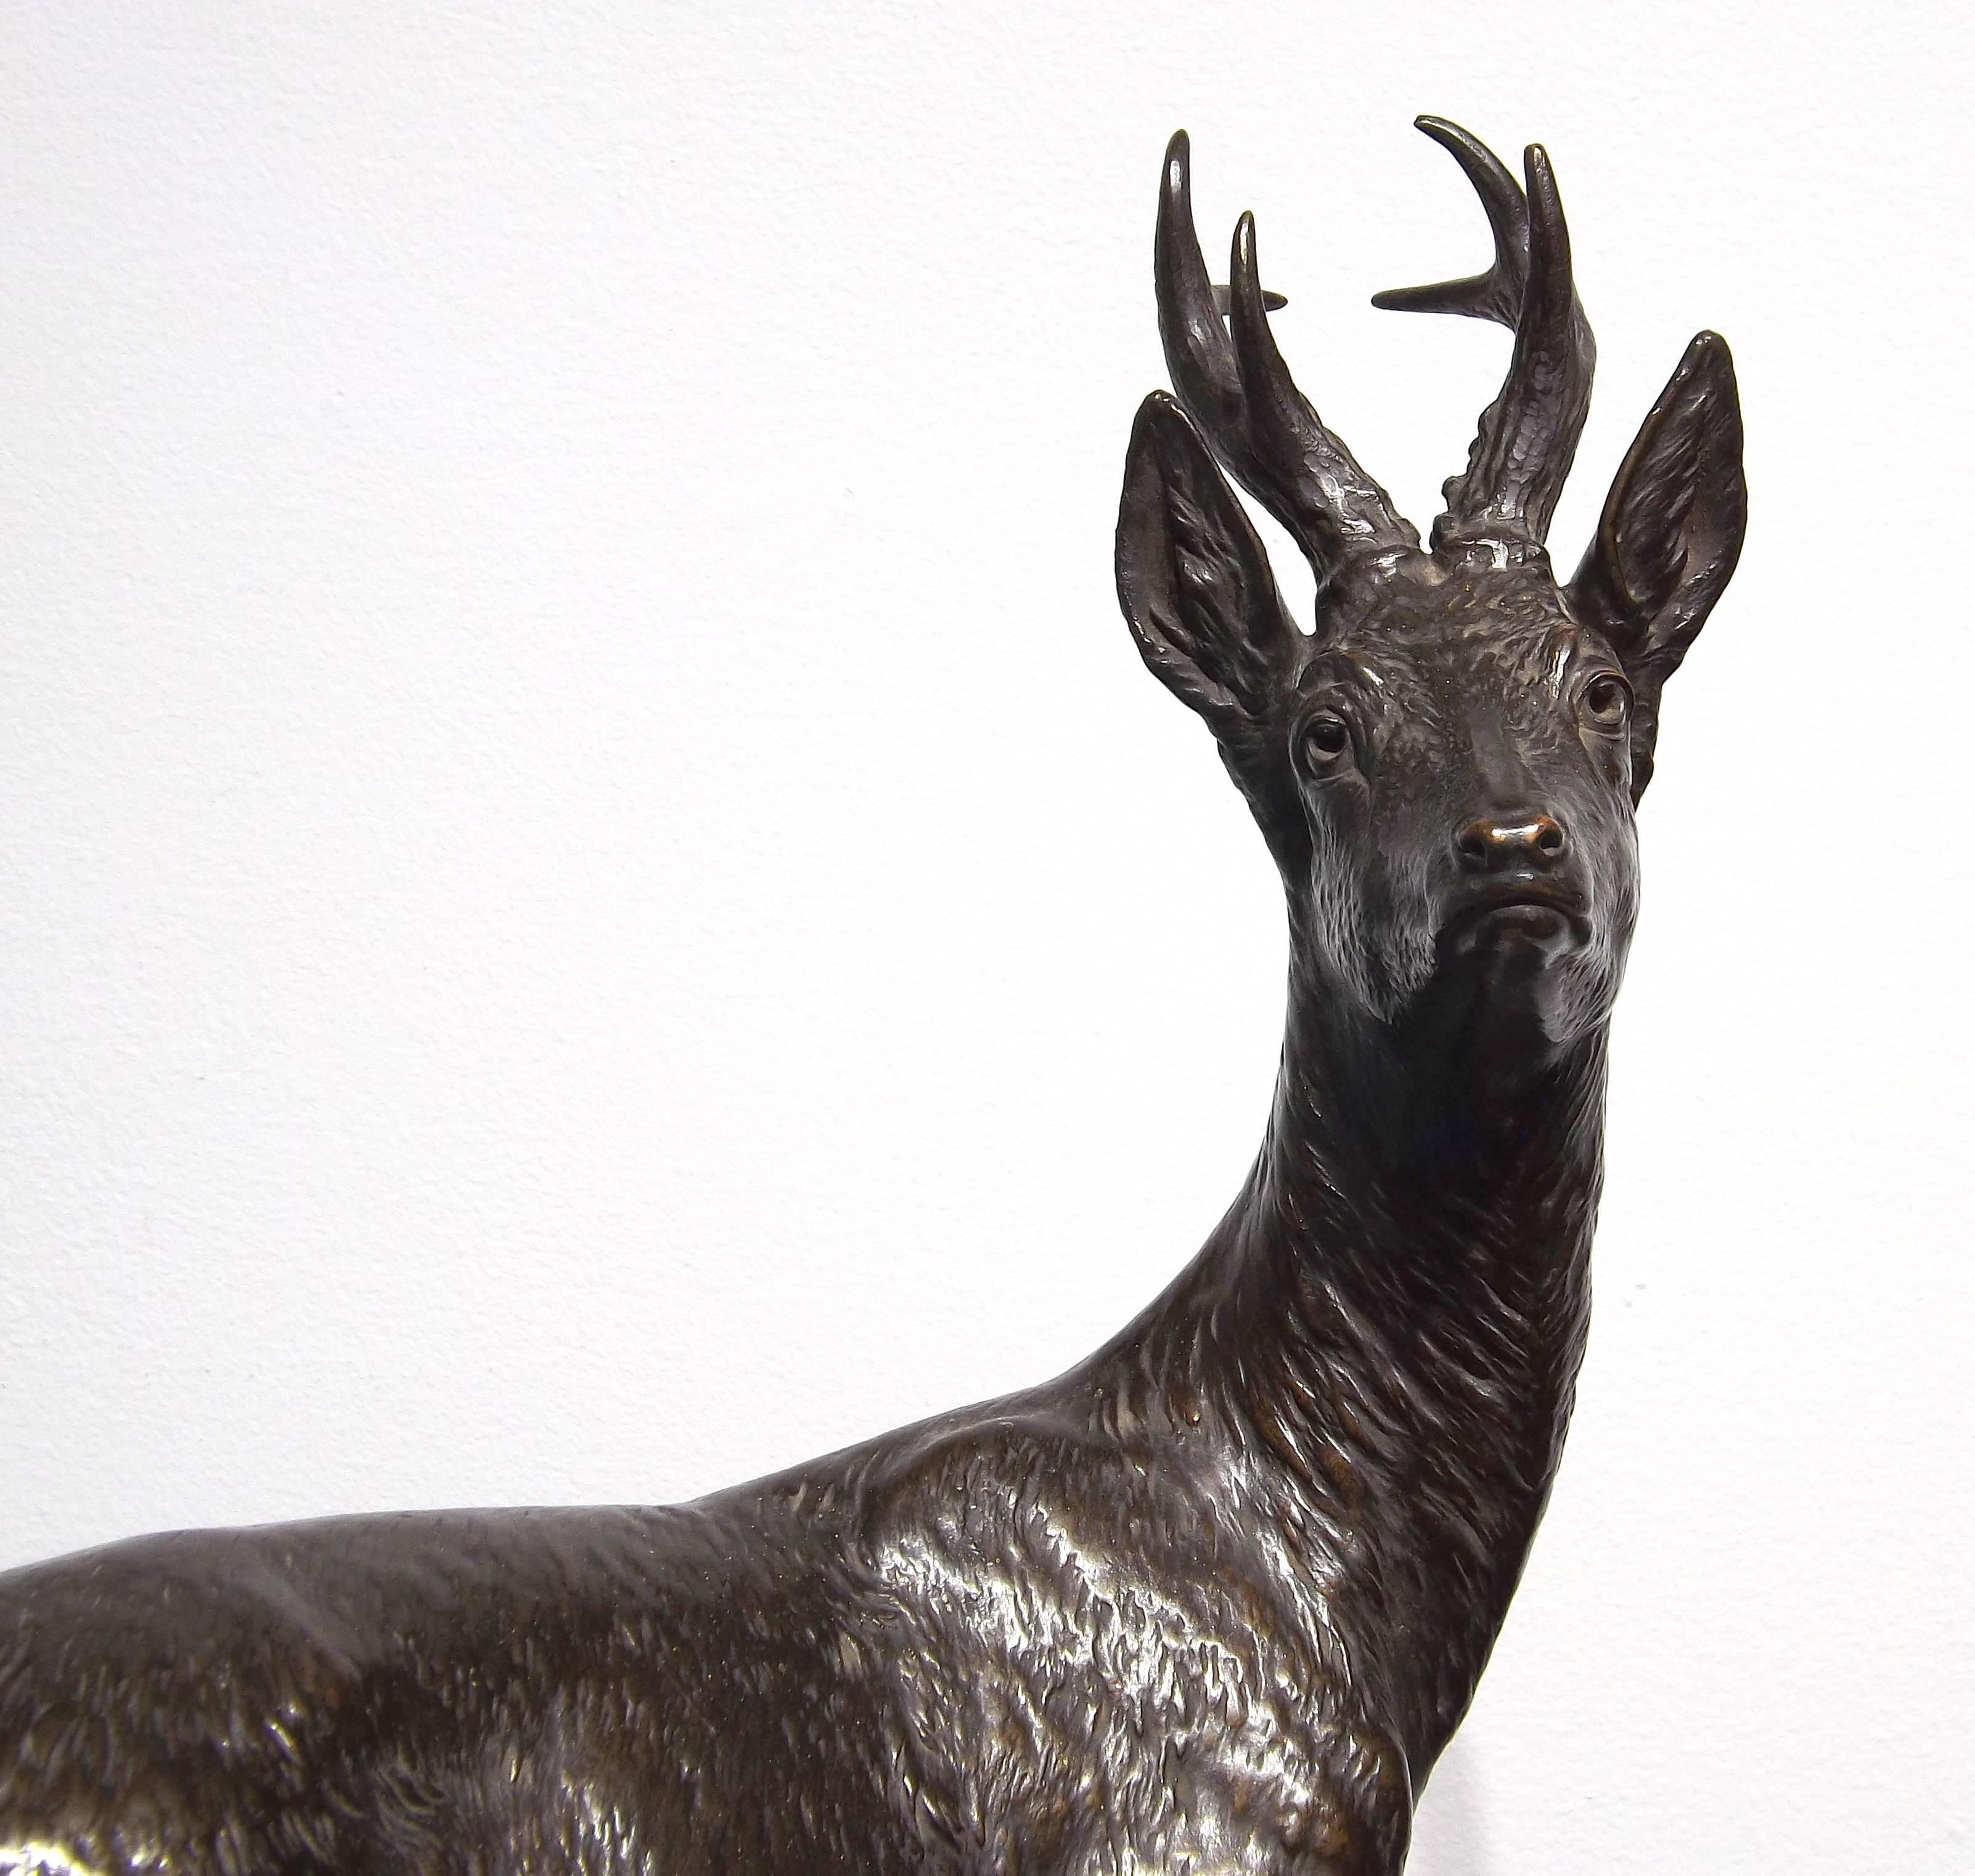 A young deer poses majestically, gazing off into the distance and ready to run at a moments notice. Excellently sculpted by German artist Fritz Diller (1875 - 1945).

Diller was born in Gerhausen, but eventually settled himself in the city of